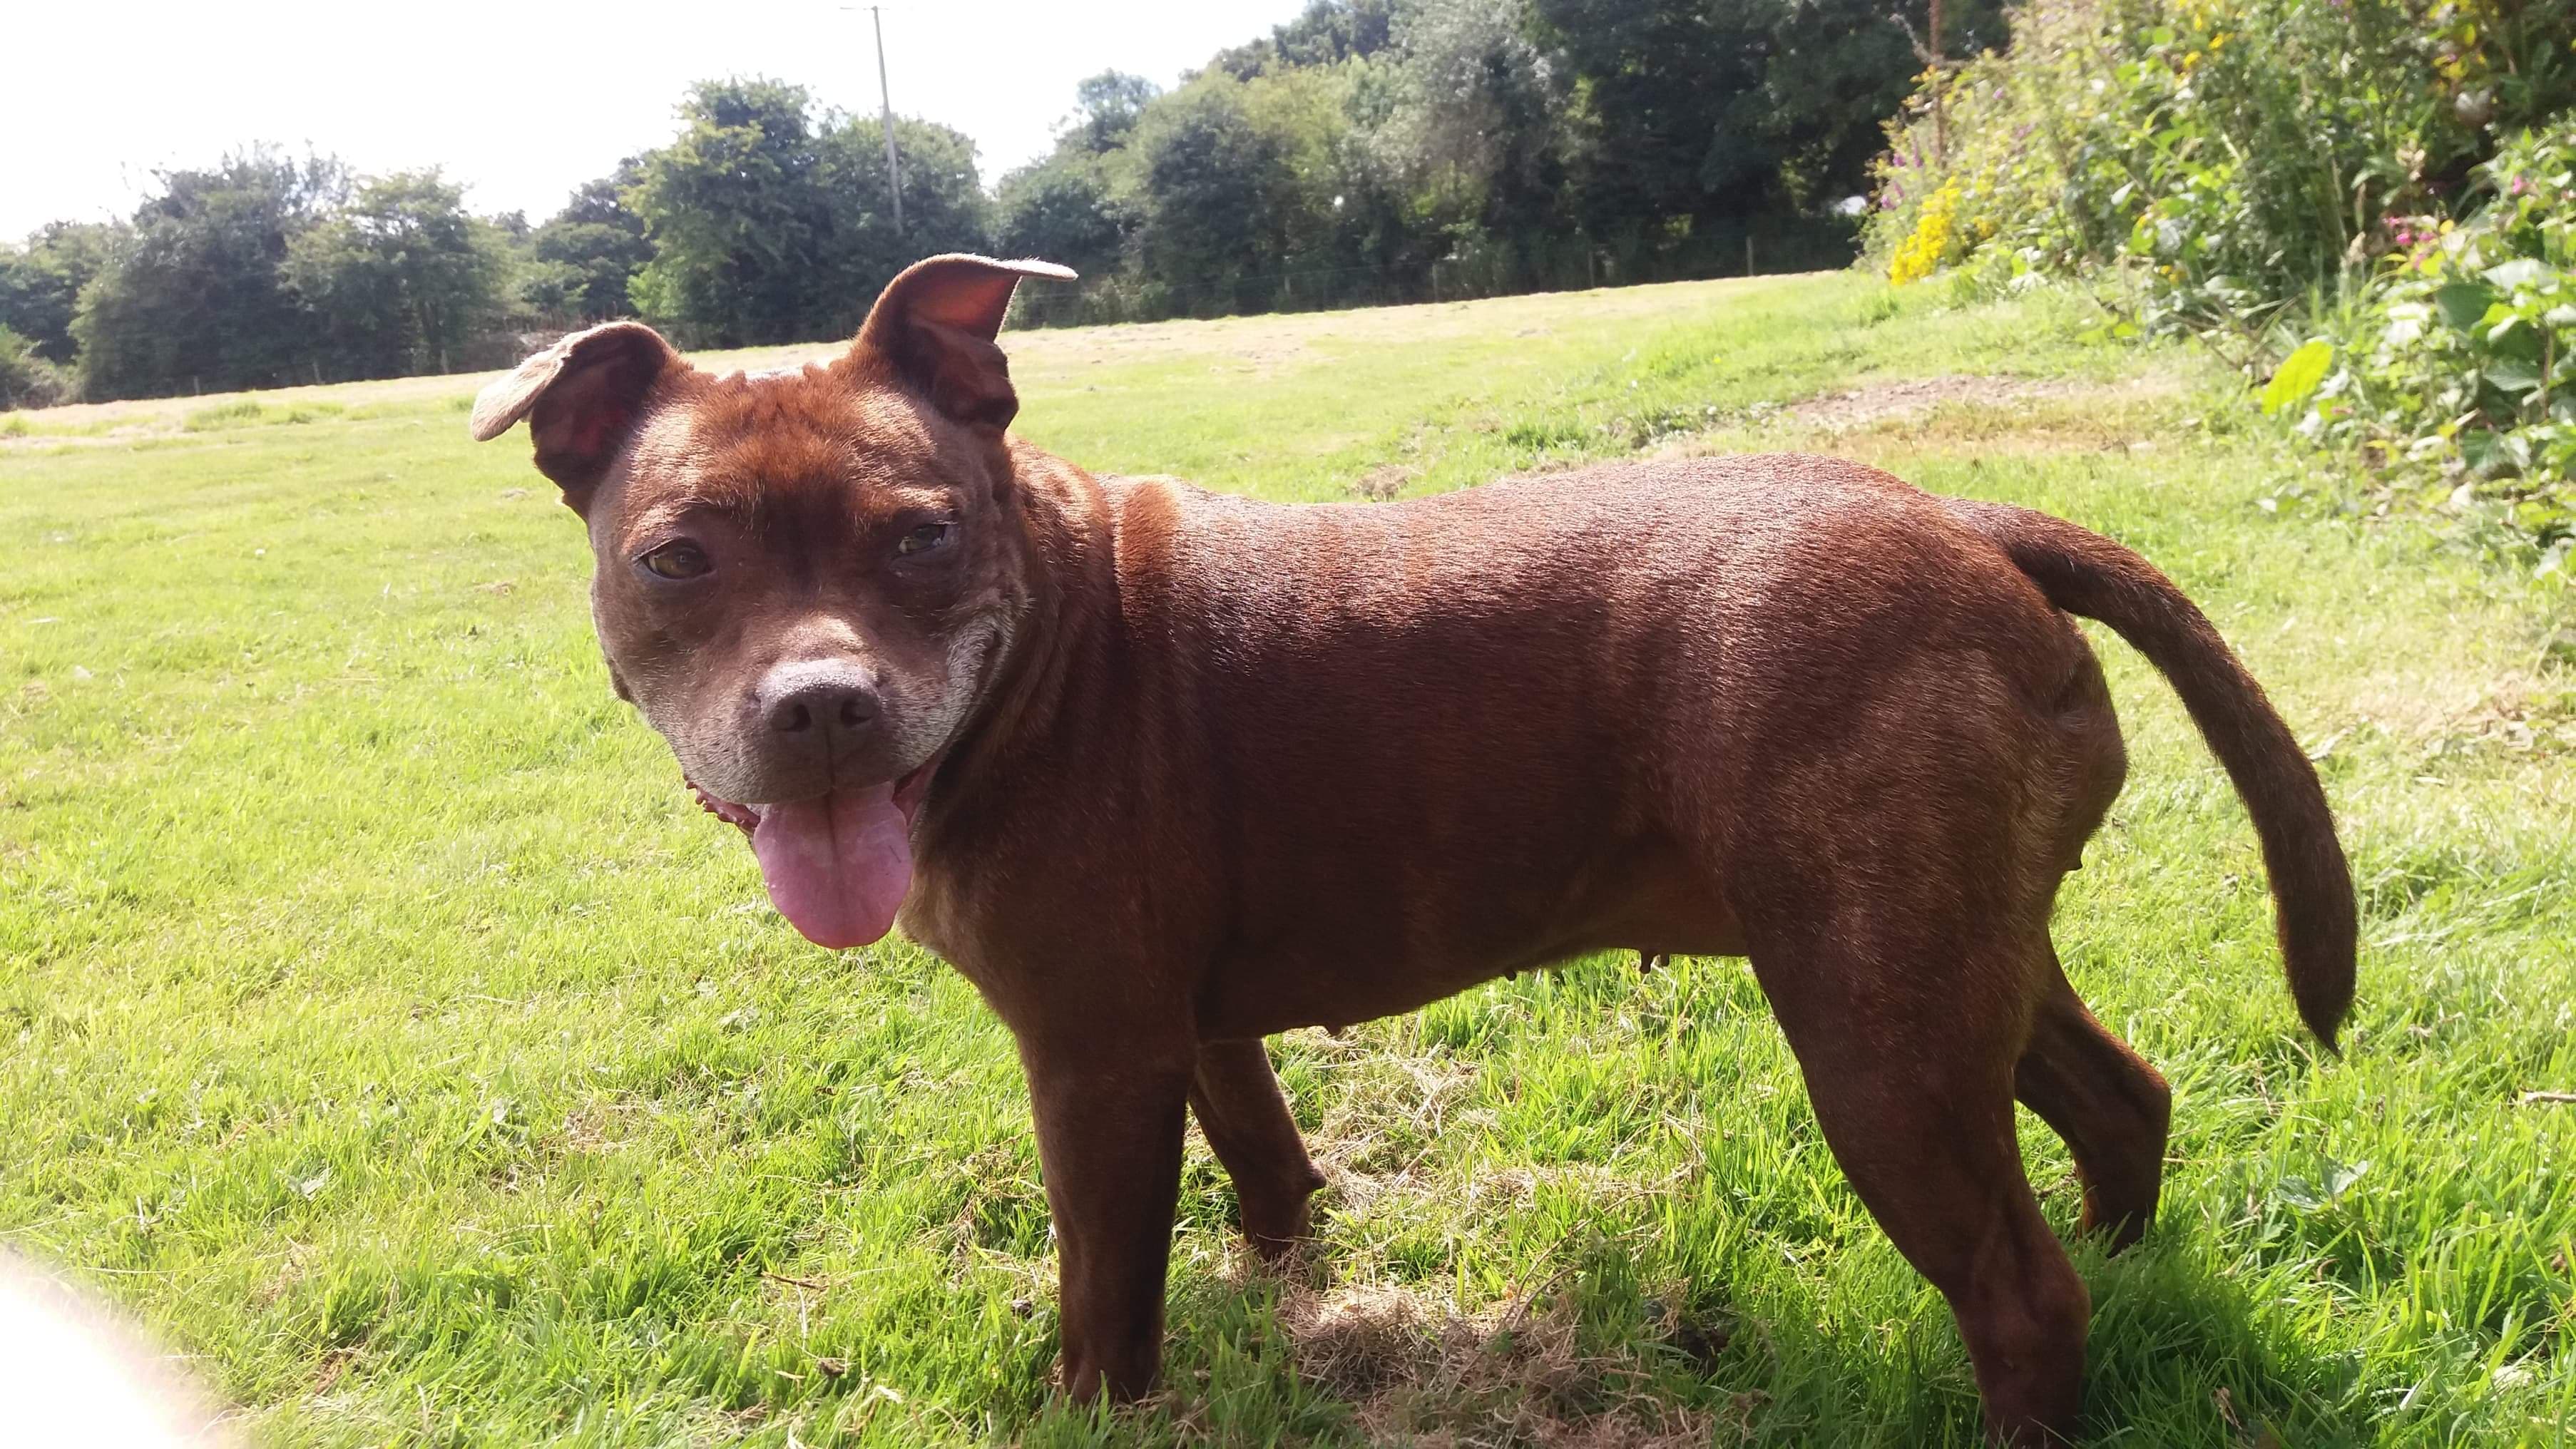 Staffordshire Bull Terrier with Yeast and intestinal